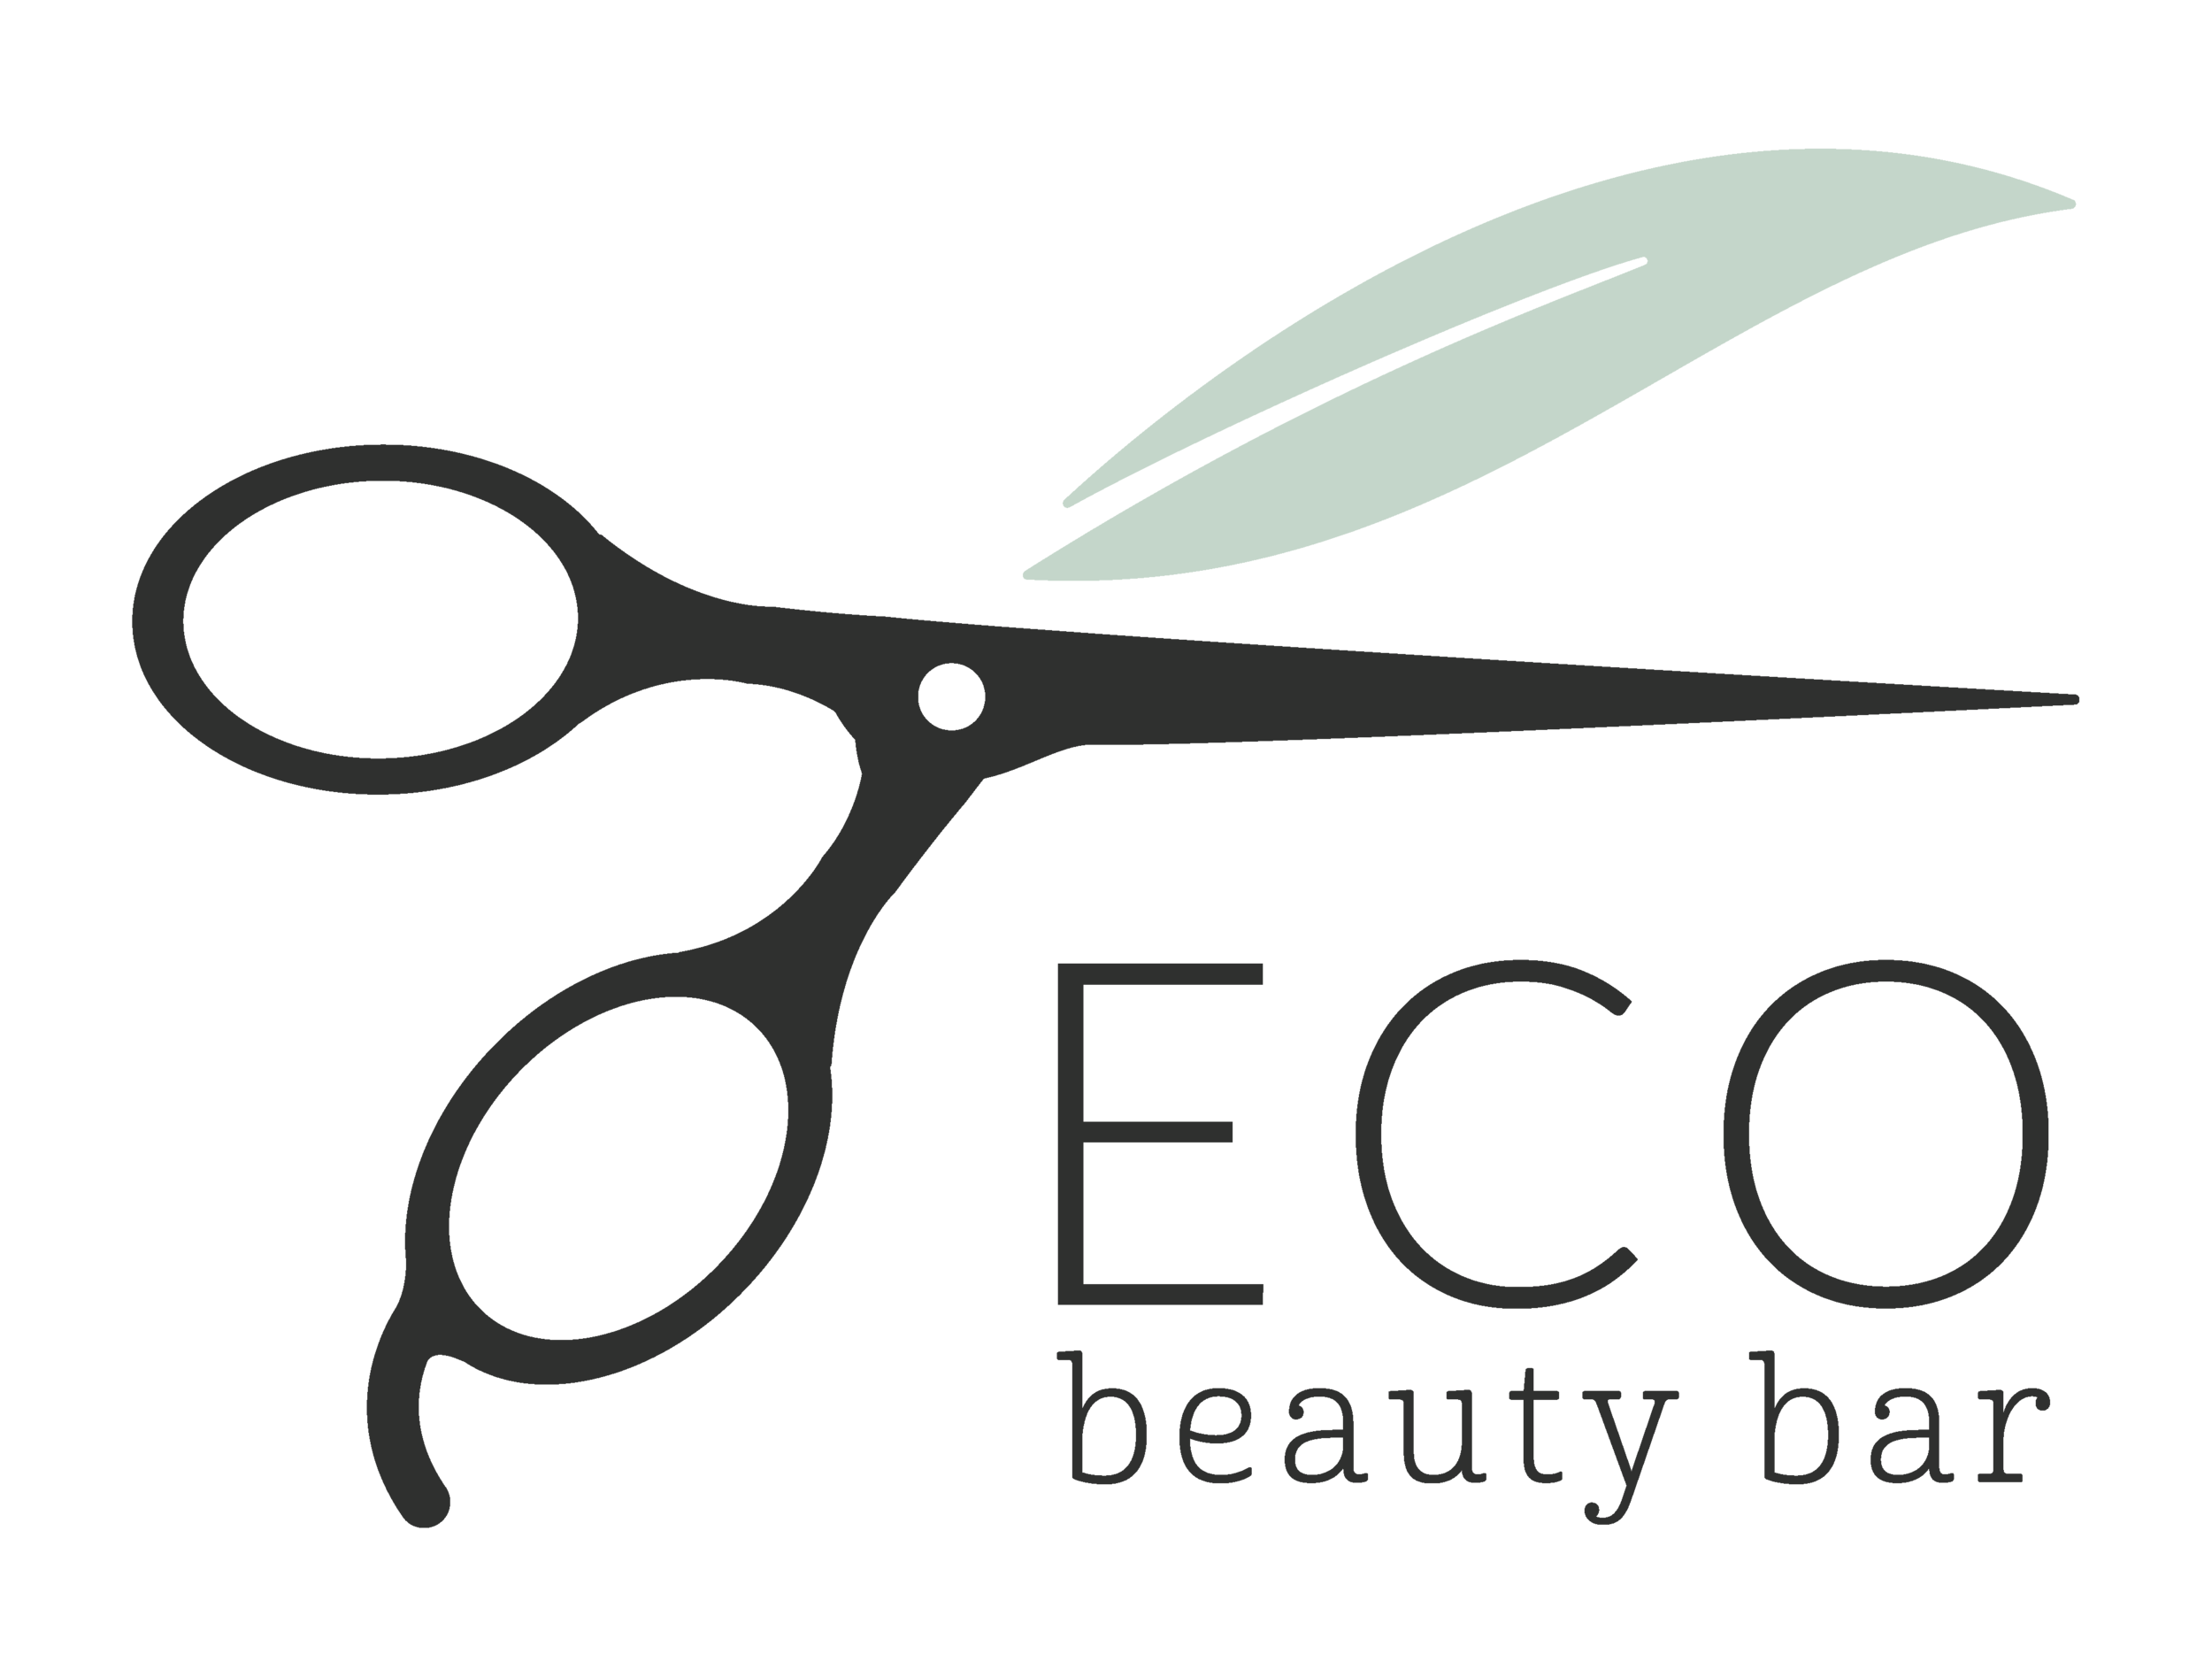 ECOBeautyBar_Primary.png